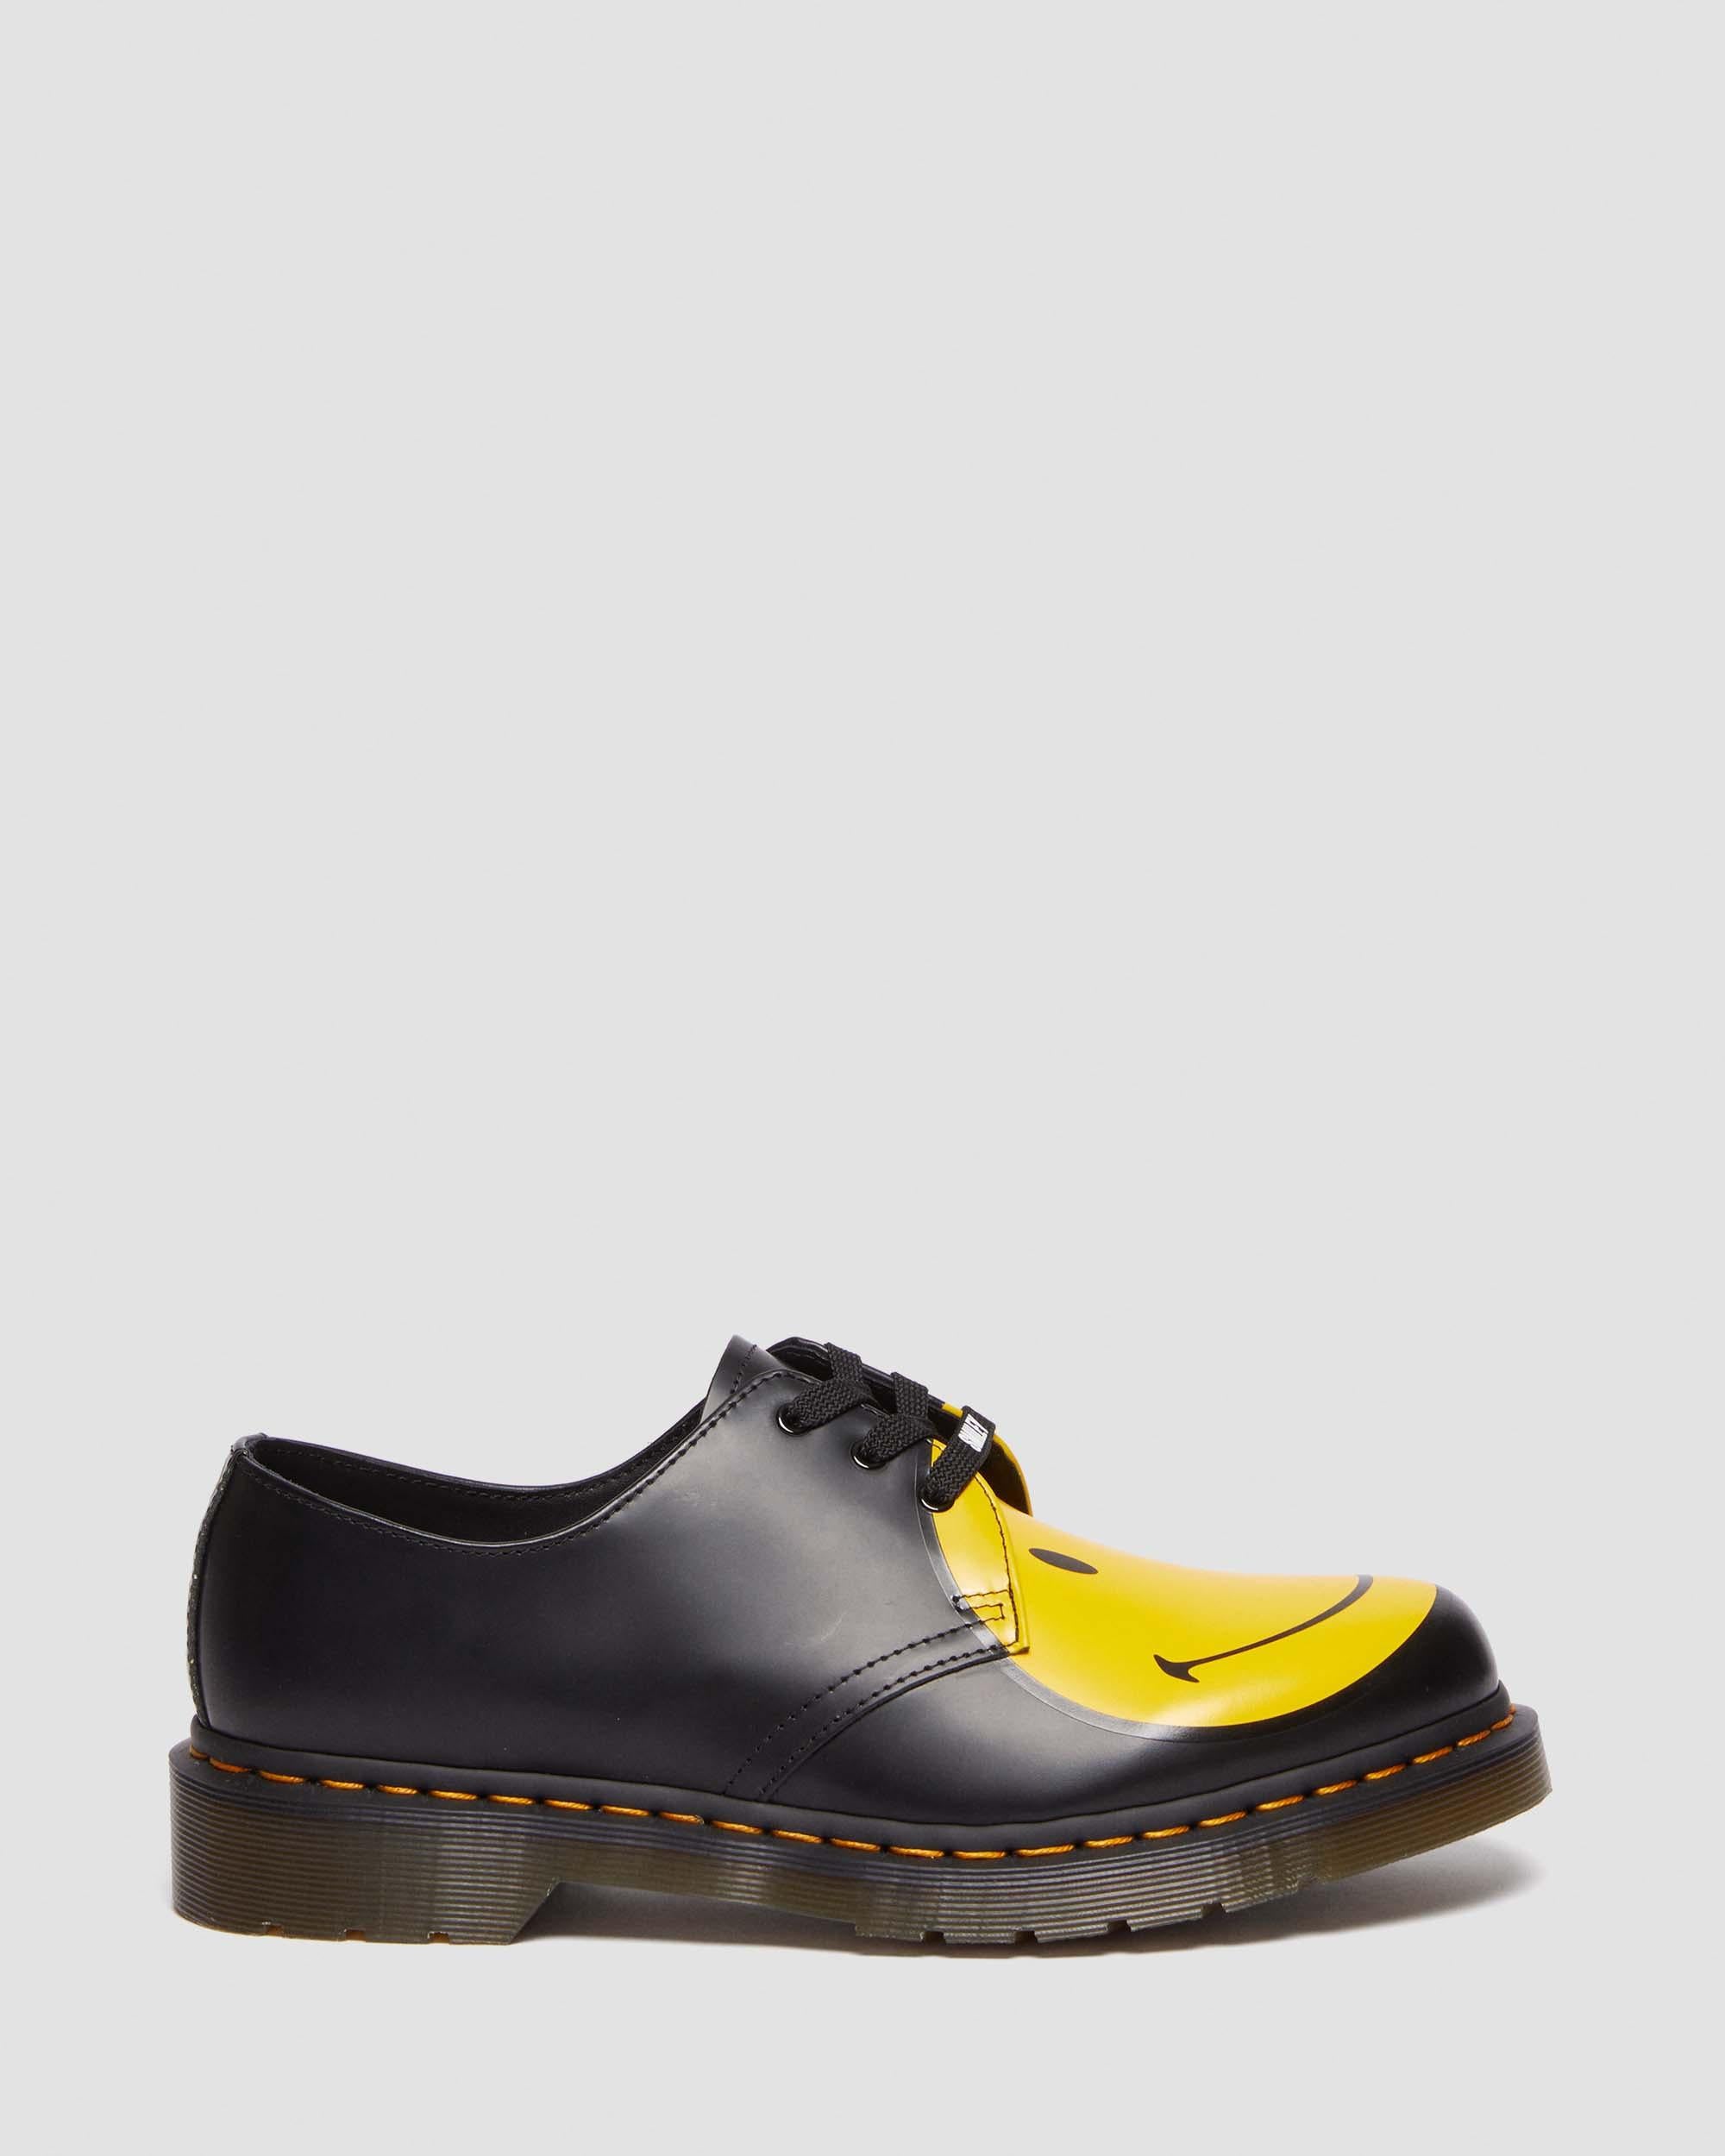 1461 Large Smiley Smooth Leather Oxford Shoes